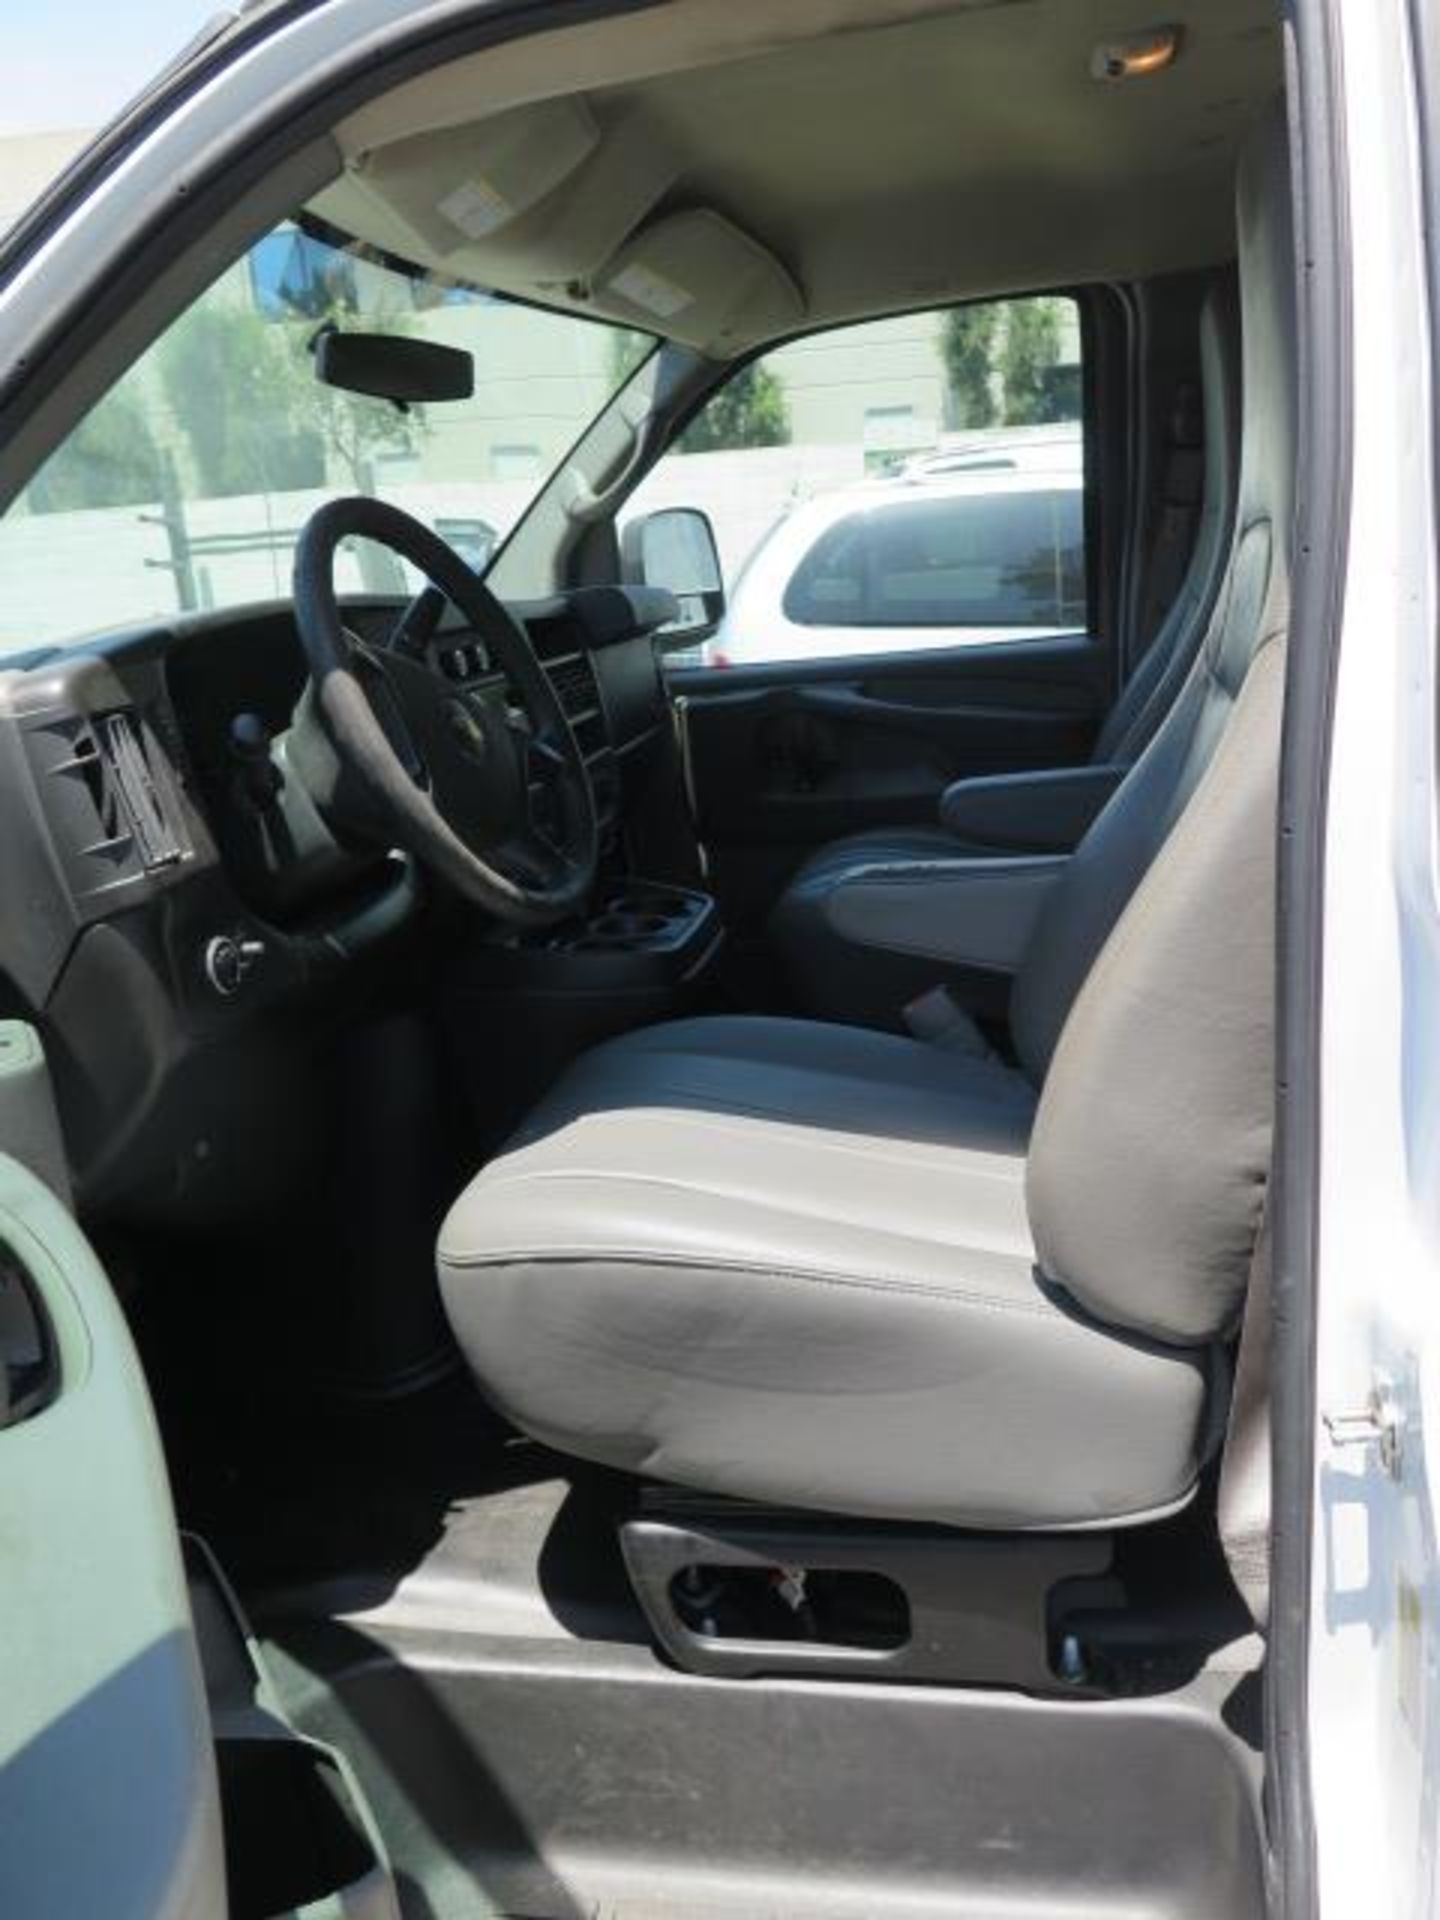 2014 Chevrolet Express Cargo Van Lisc# 09169S1 w/ Vortec V8 Gas Engine, Automatic Trans, SOLD AS IS - Image 9 of 23